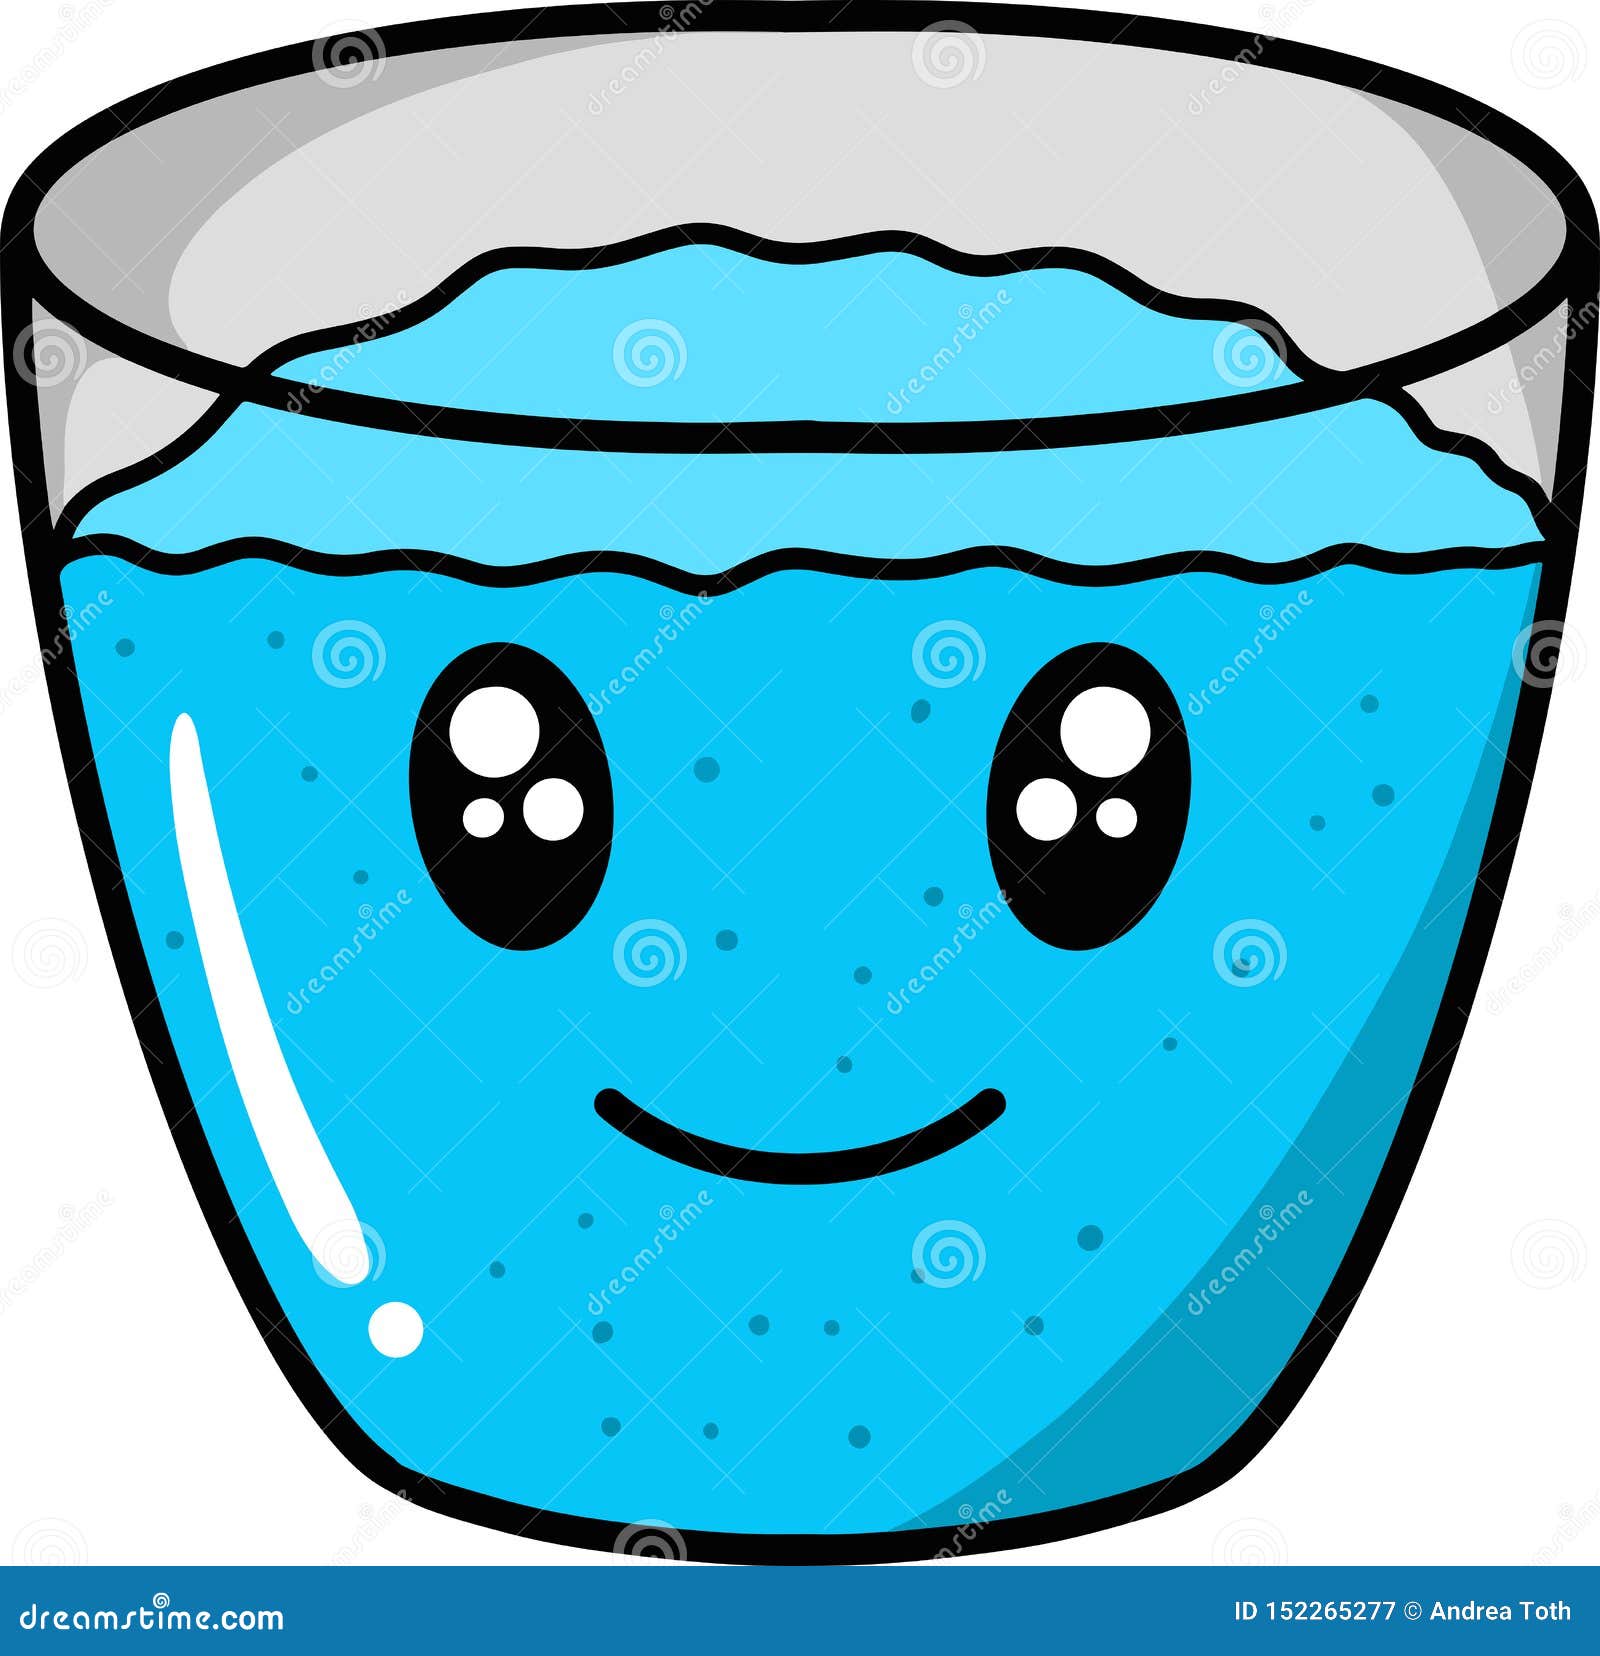 Hand Drawing Cartoon Doodle Water Glass Vector Ipad Pro Procreate Drawing  with Apple Pencil Stock Illustration - Illustration of drawn, bubble:  152265277